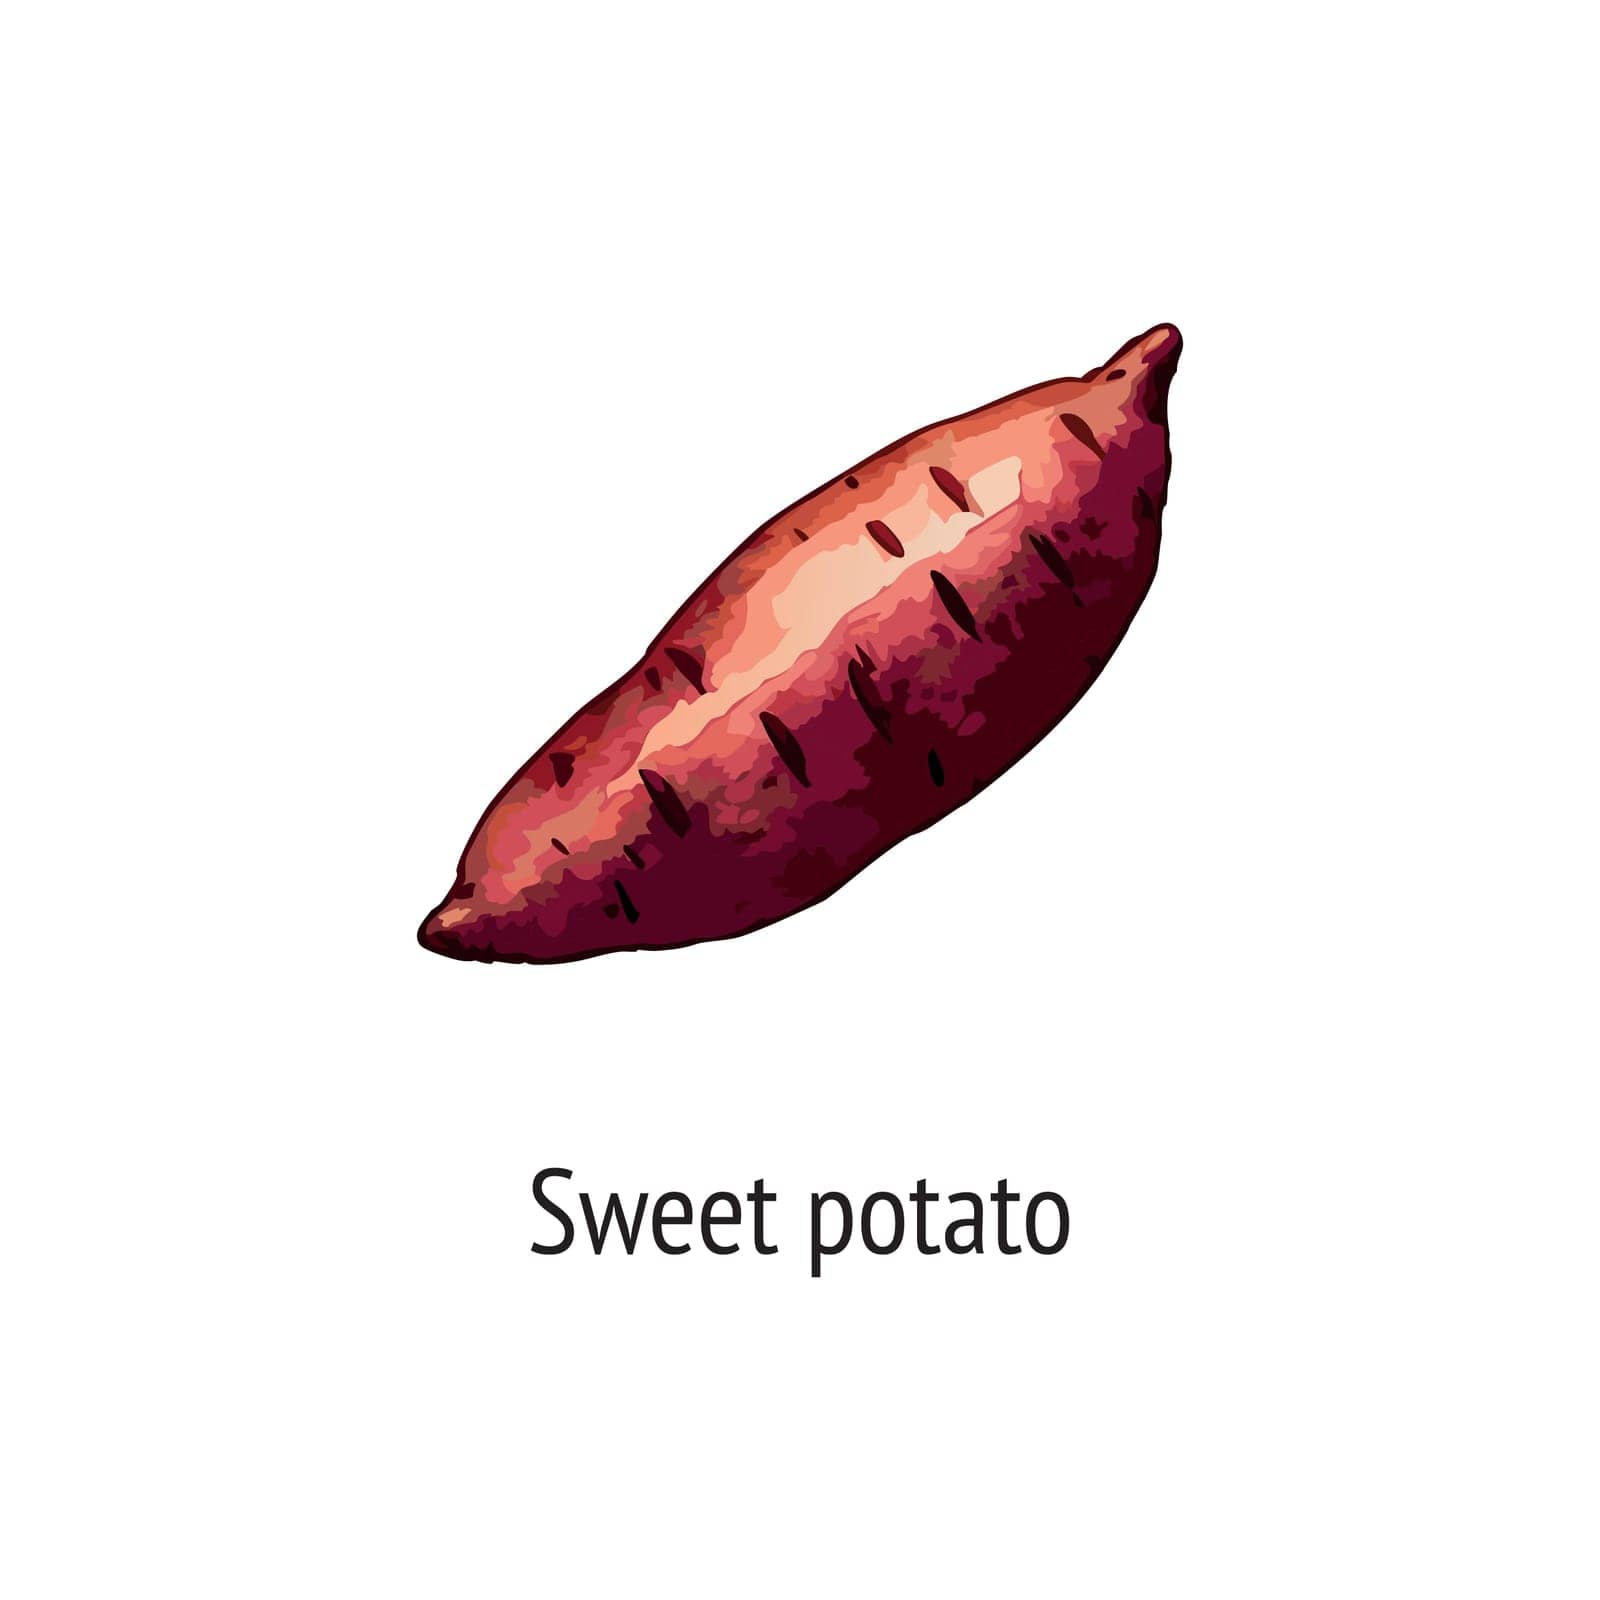 Sweet potato vector illustration. Drawing of sweet potato in watercolor style